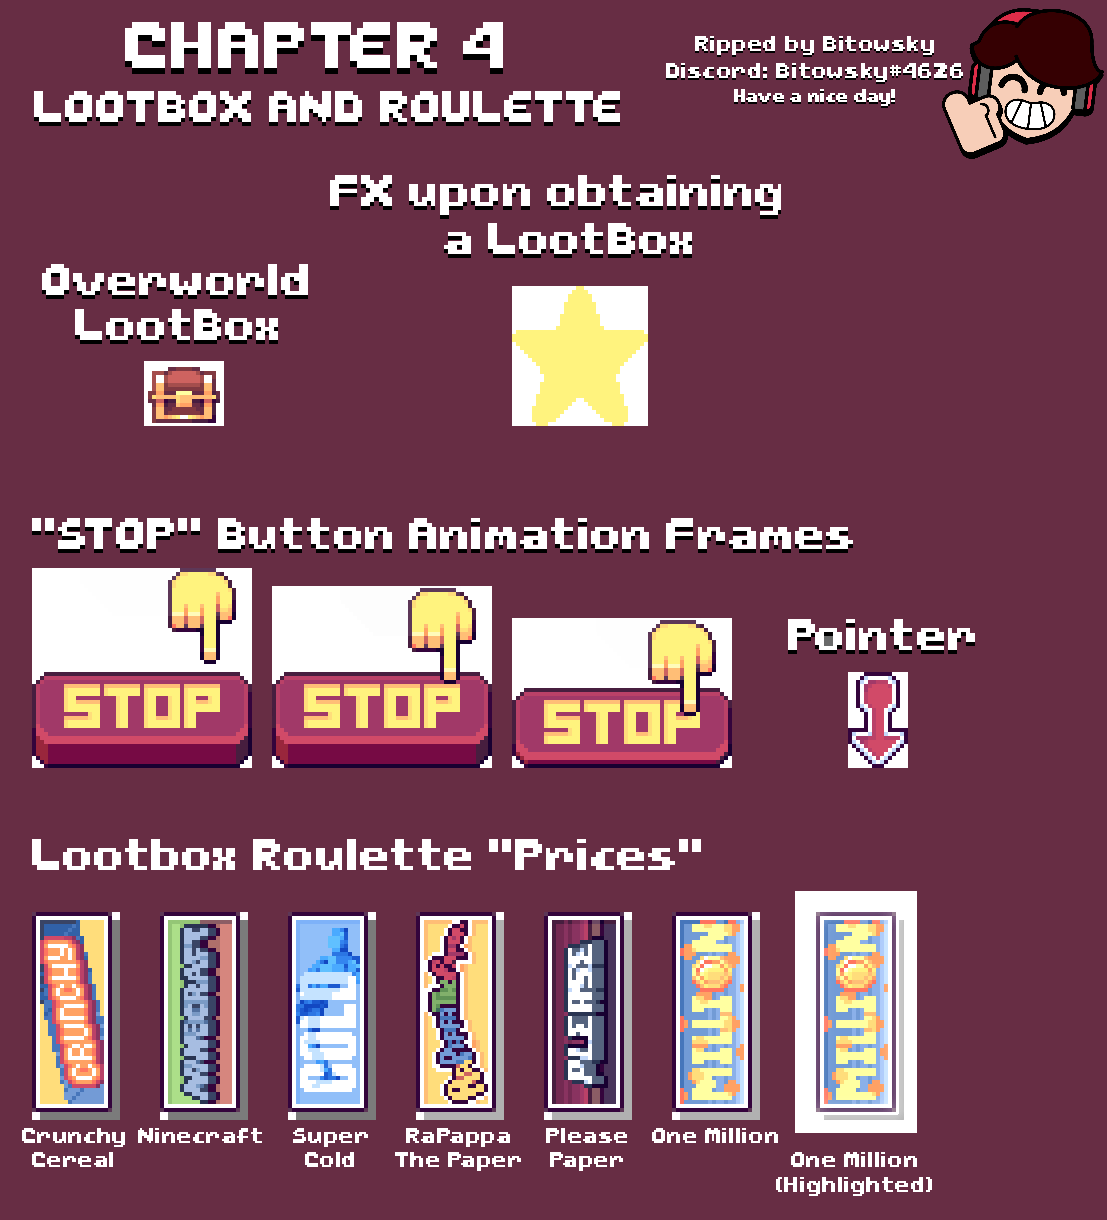 Lootbox / Roulette